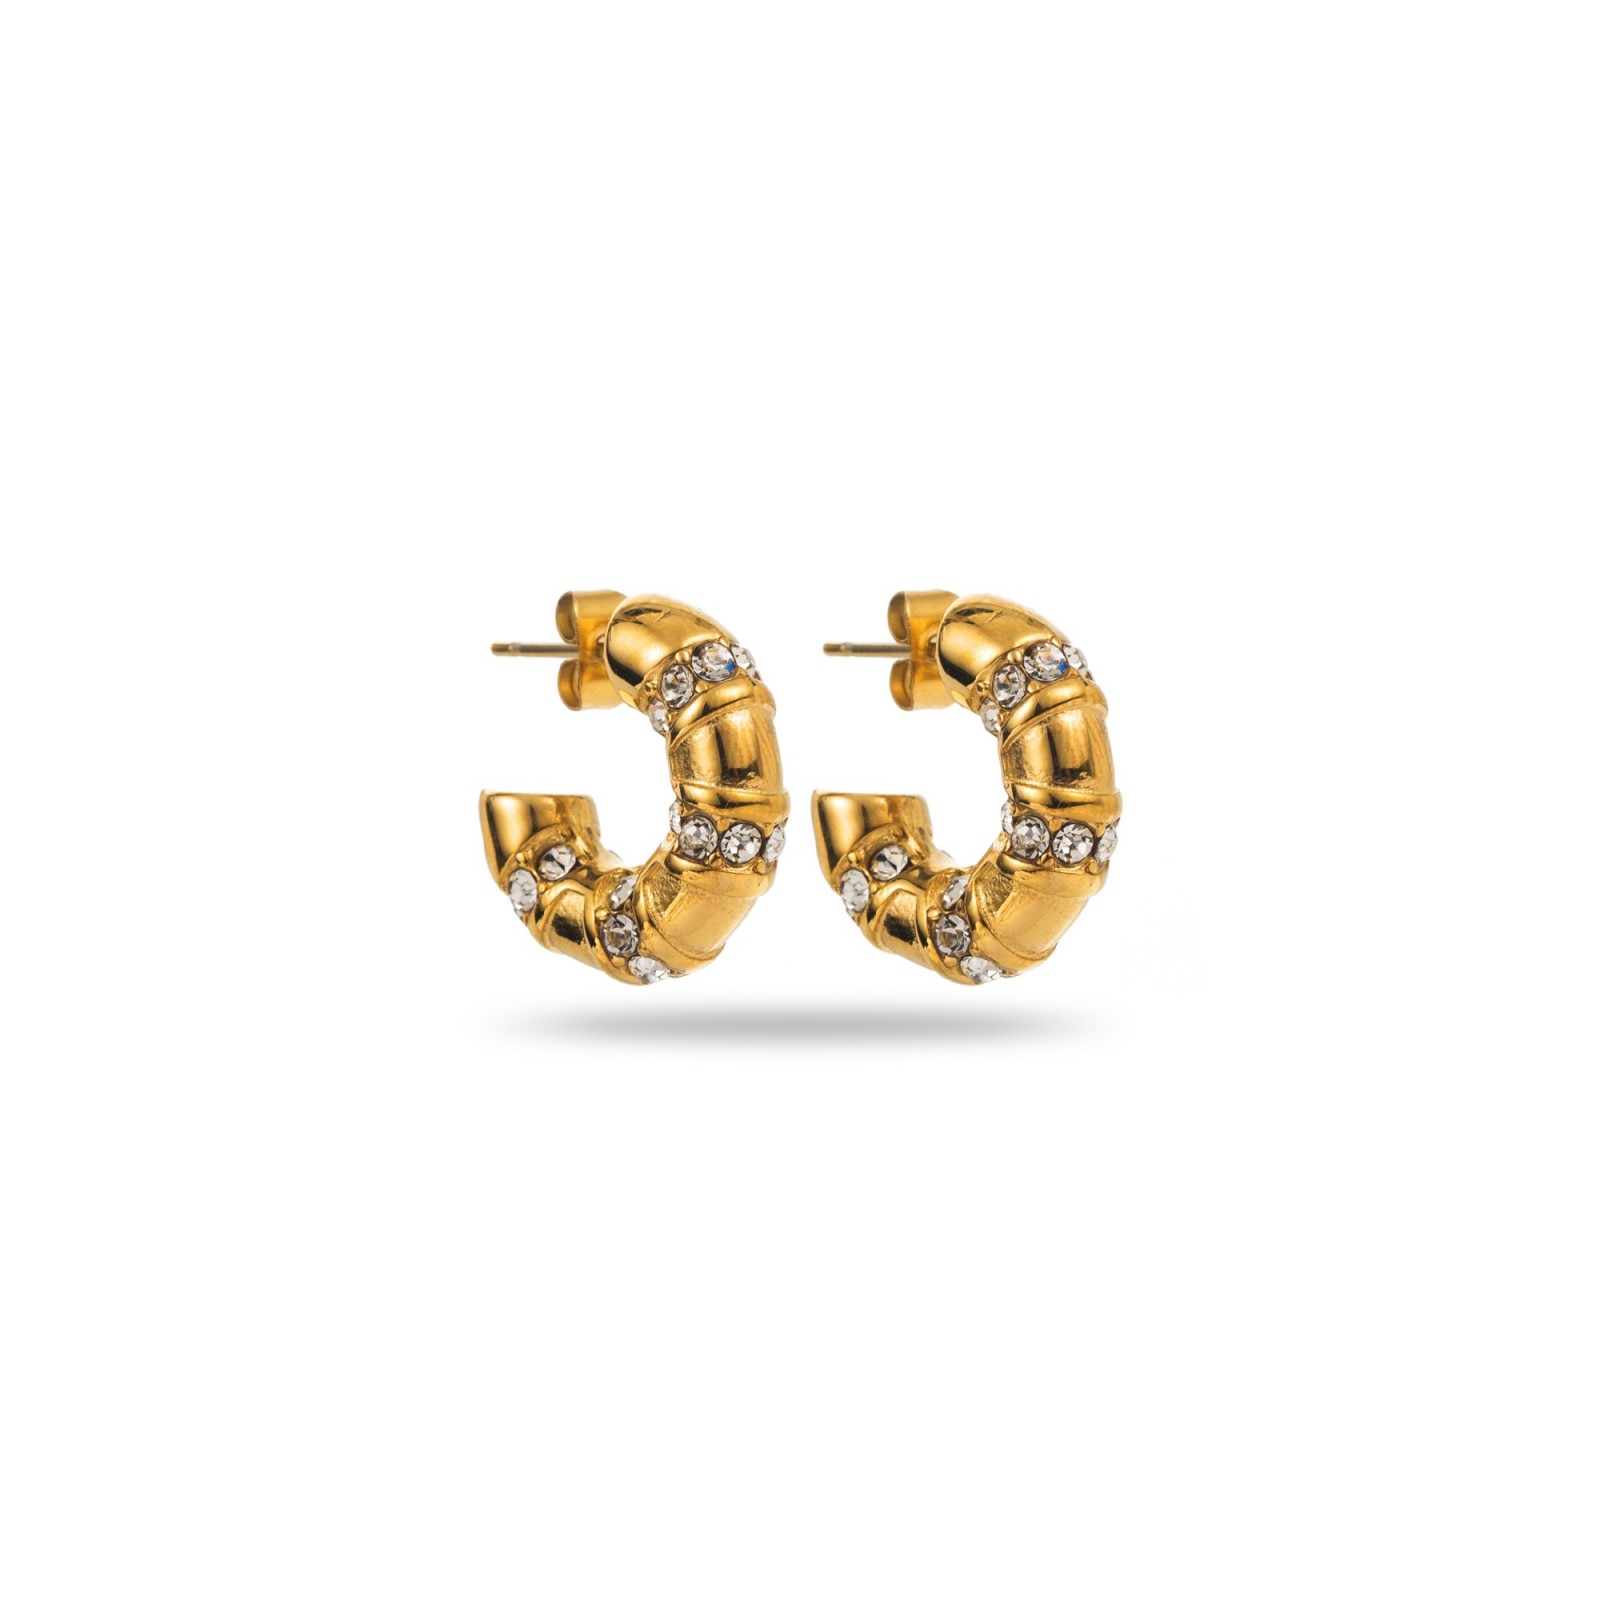 Rhinestone Paved Small Hoops Earrings Color:Gold